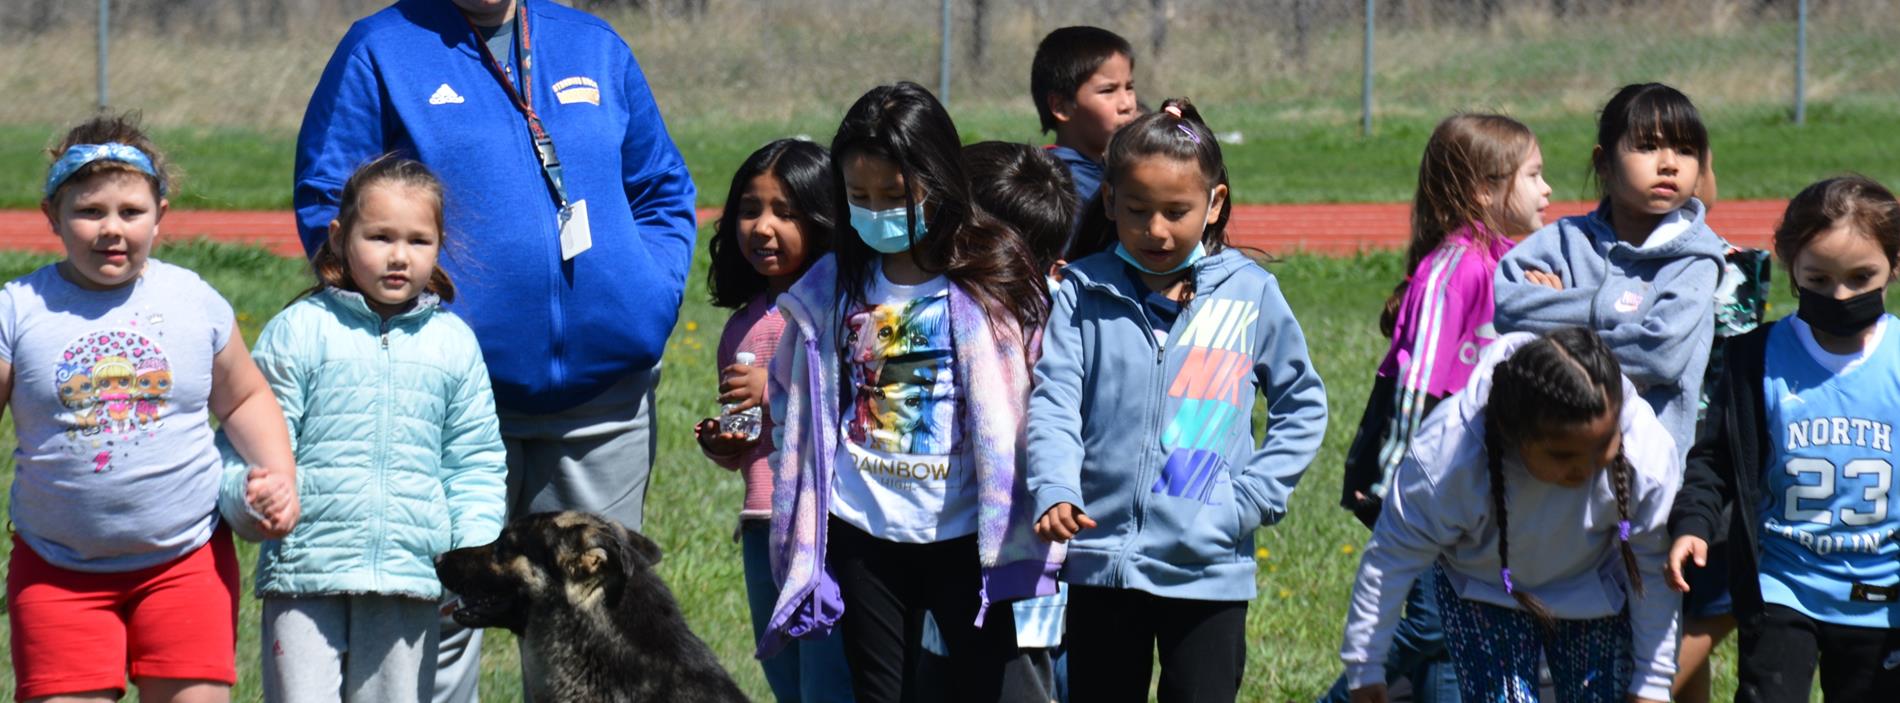 Kindergarten students, teacher, and dog at play day 